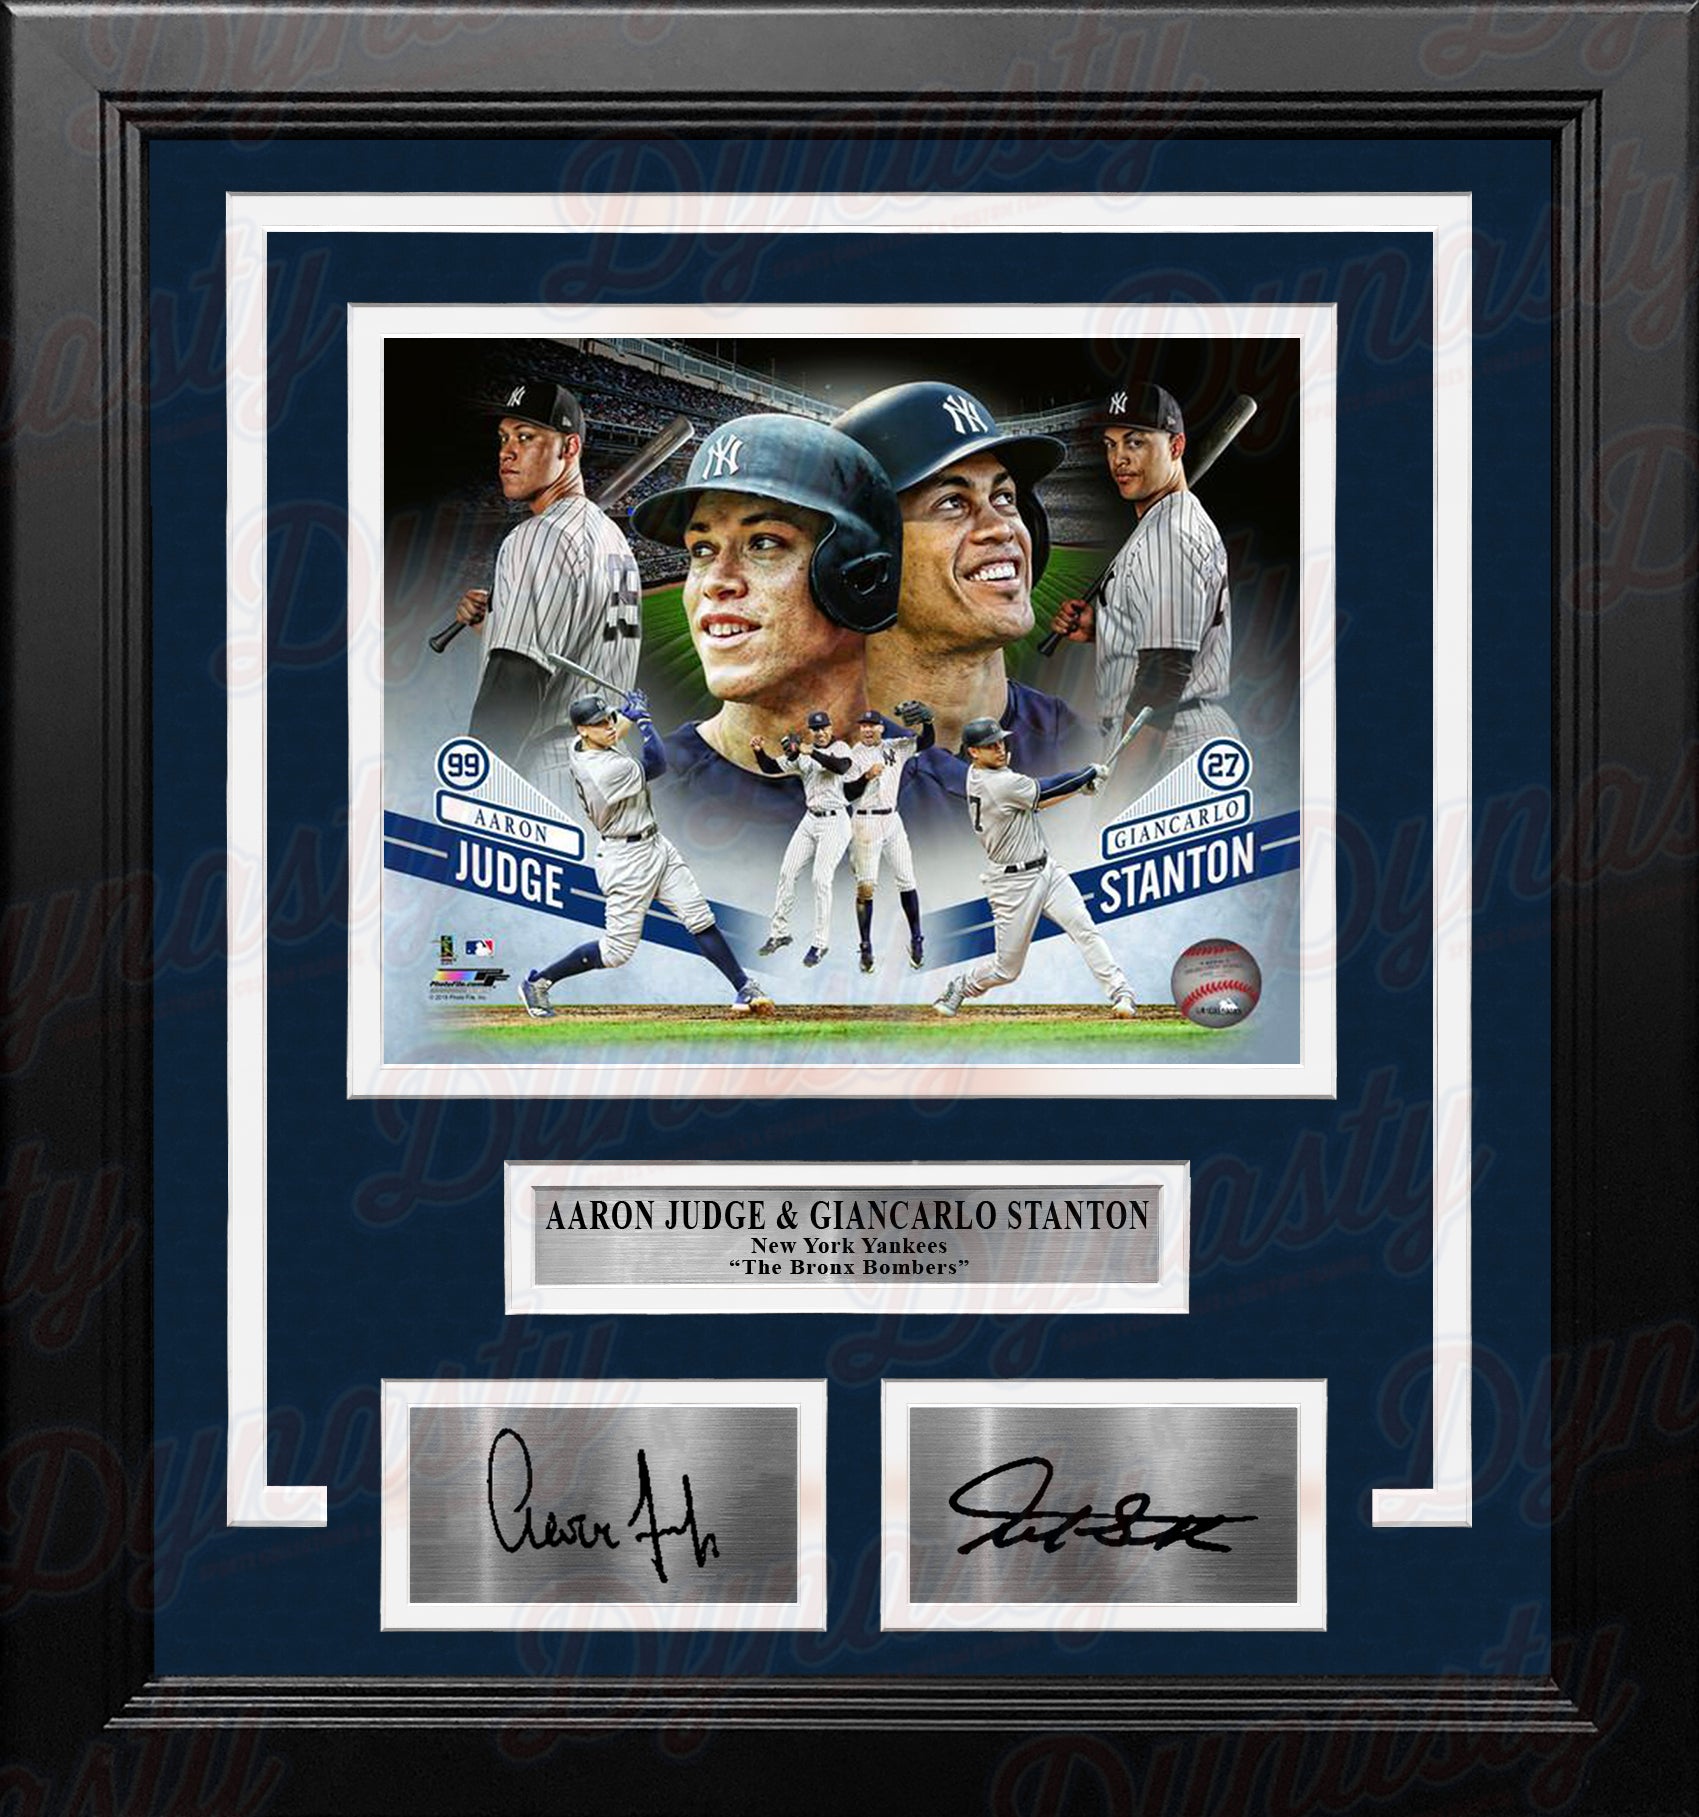 Aaron Judge & Giancarlo Stanton New York Yankees Collage 8x10 Framed Photo  with Engraved Autographs